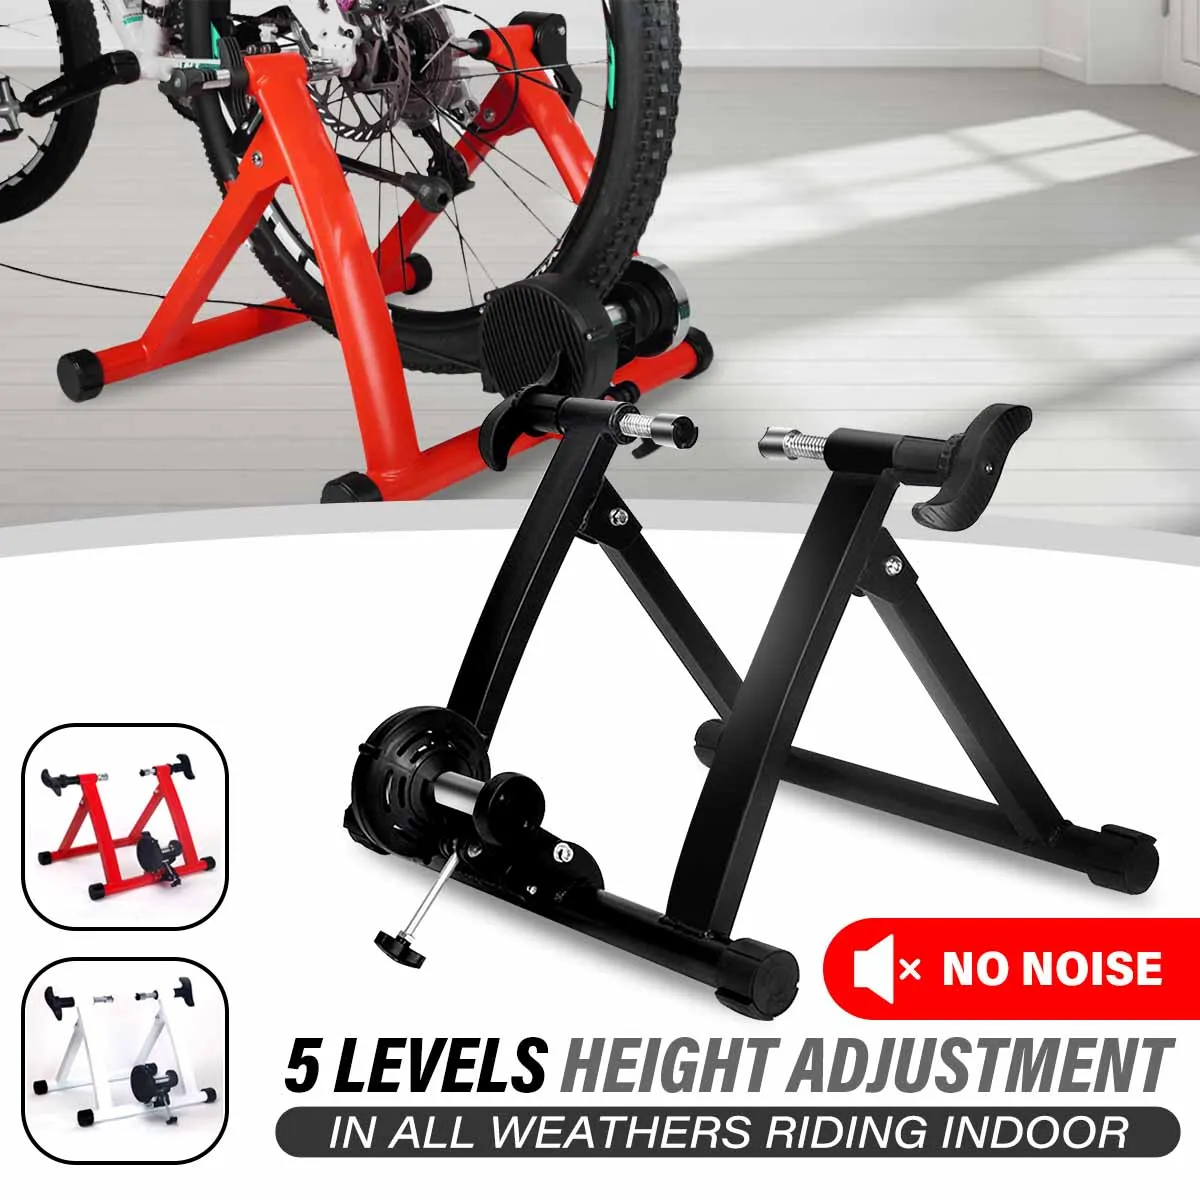 Non-Slip Resistance Bike Trainer Exercise Station Stand Training Cycling Bracket 